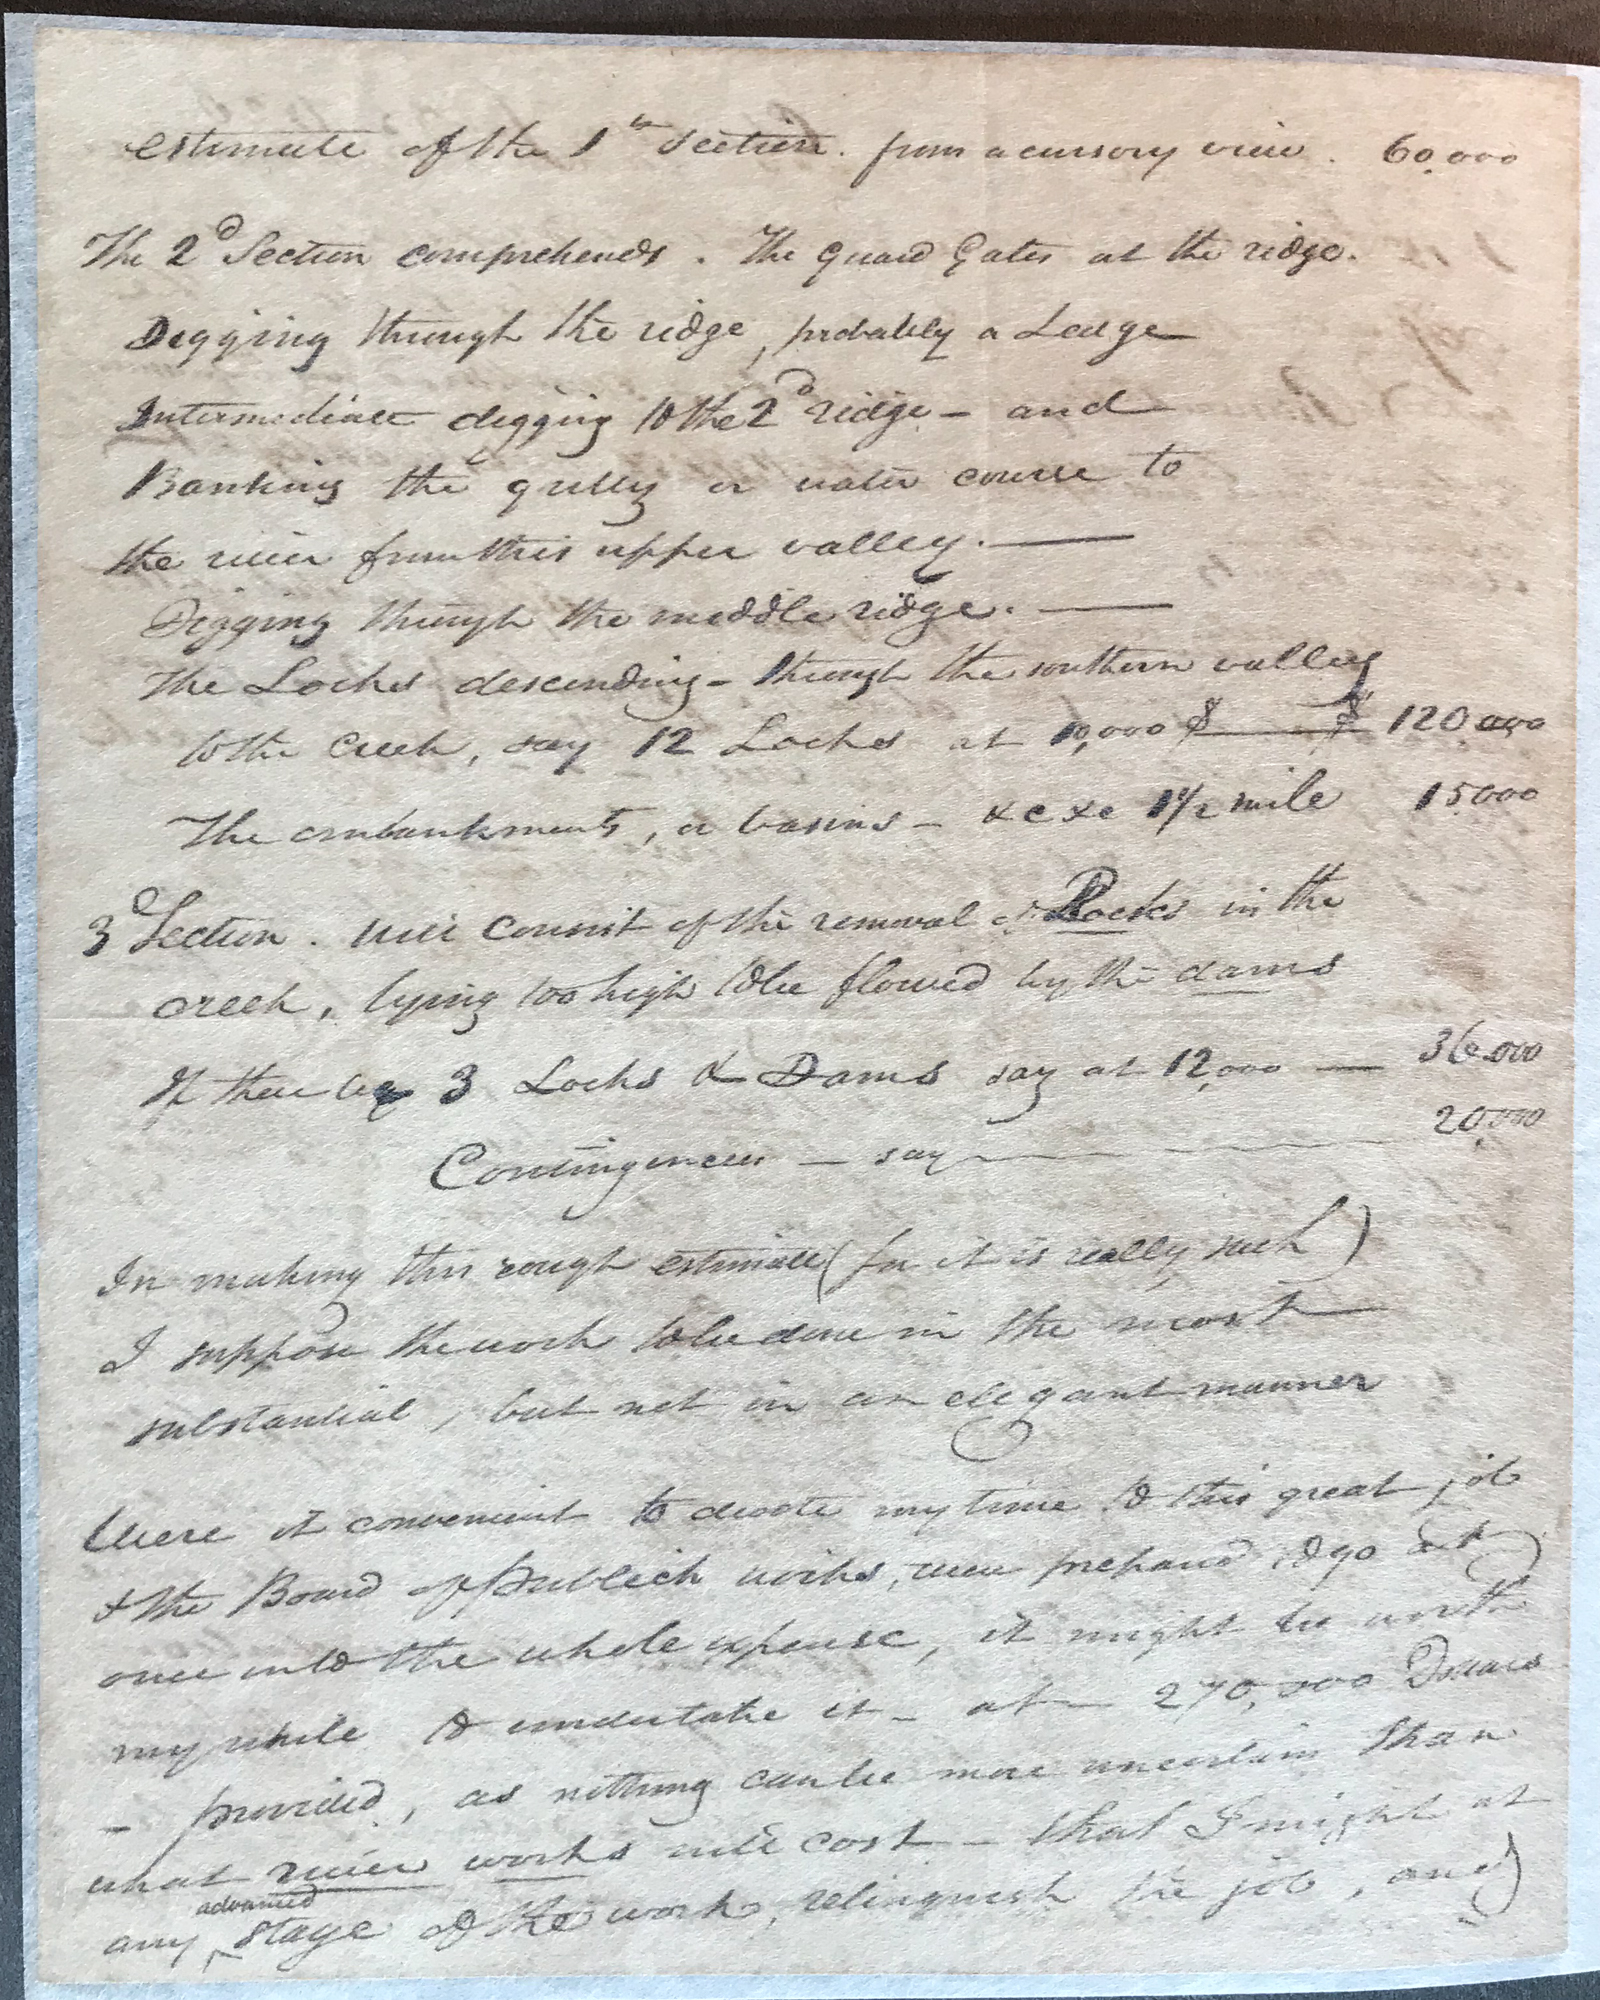 CONTRACT FOR CONSTRUCTION - 1820, p. 2